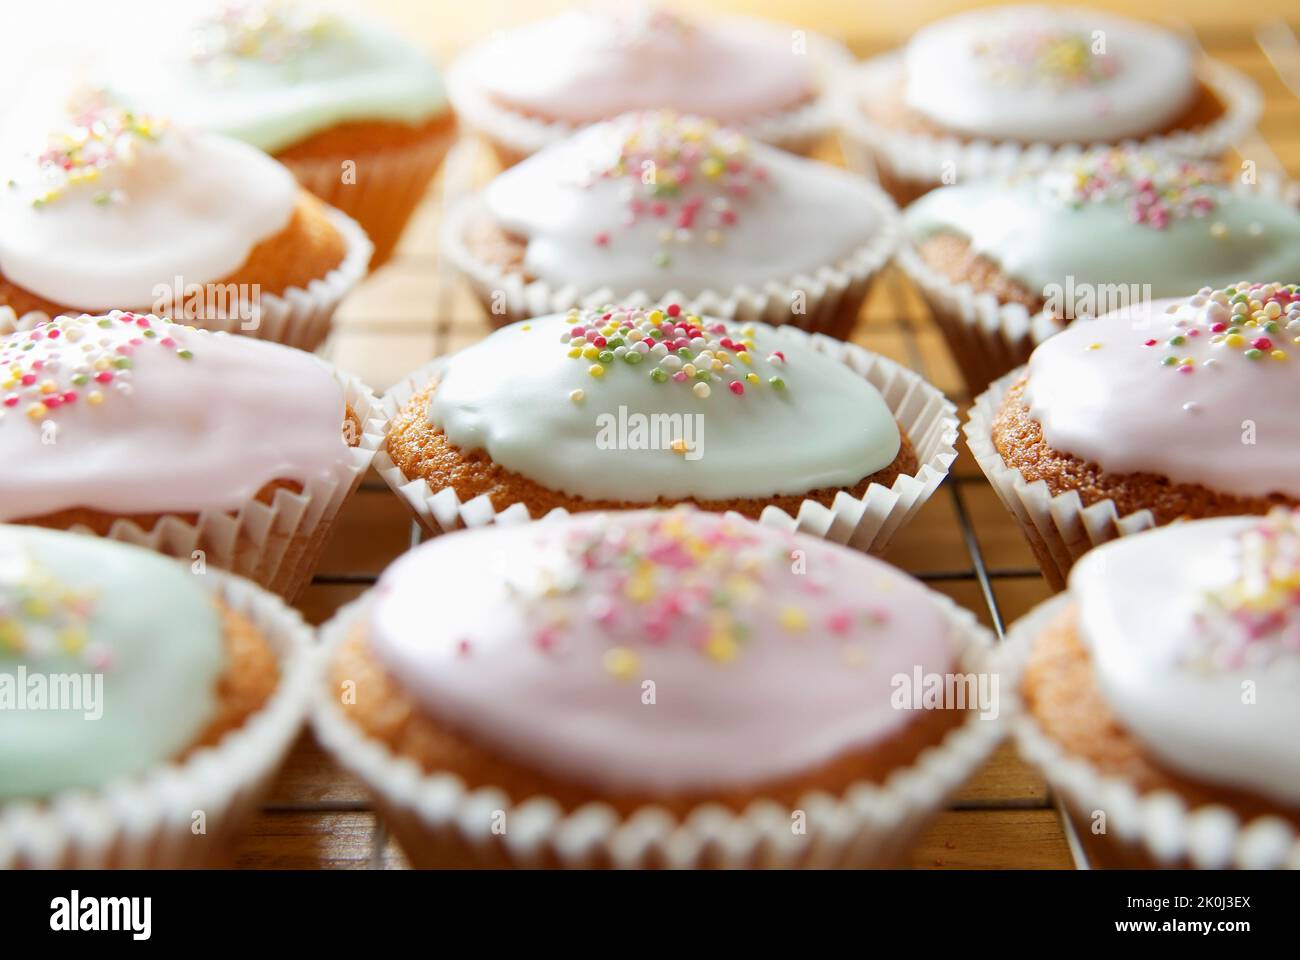 Freshly baked cupcakes in rows on a cooling tray Stock Photo